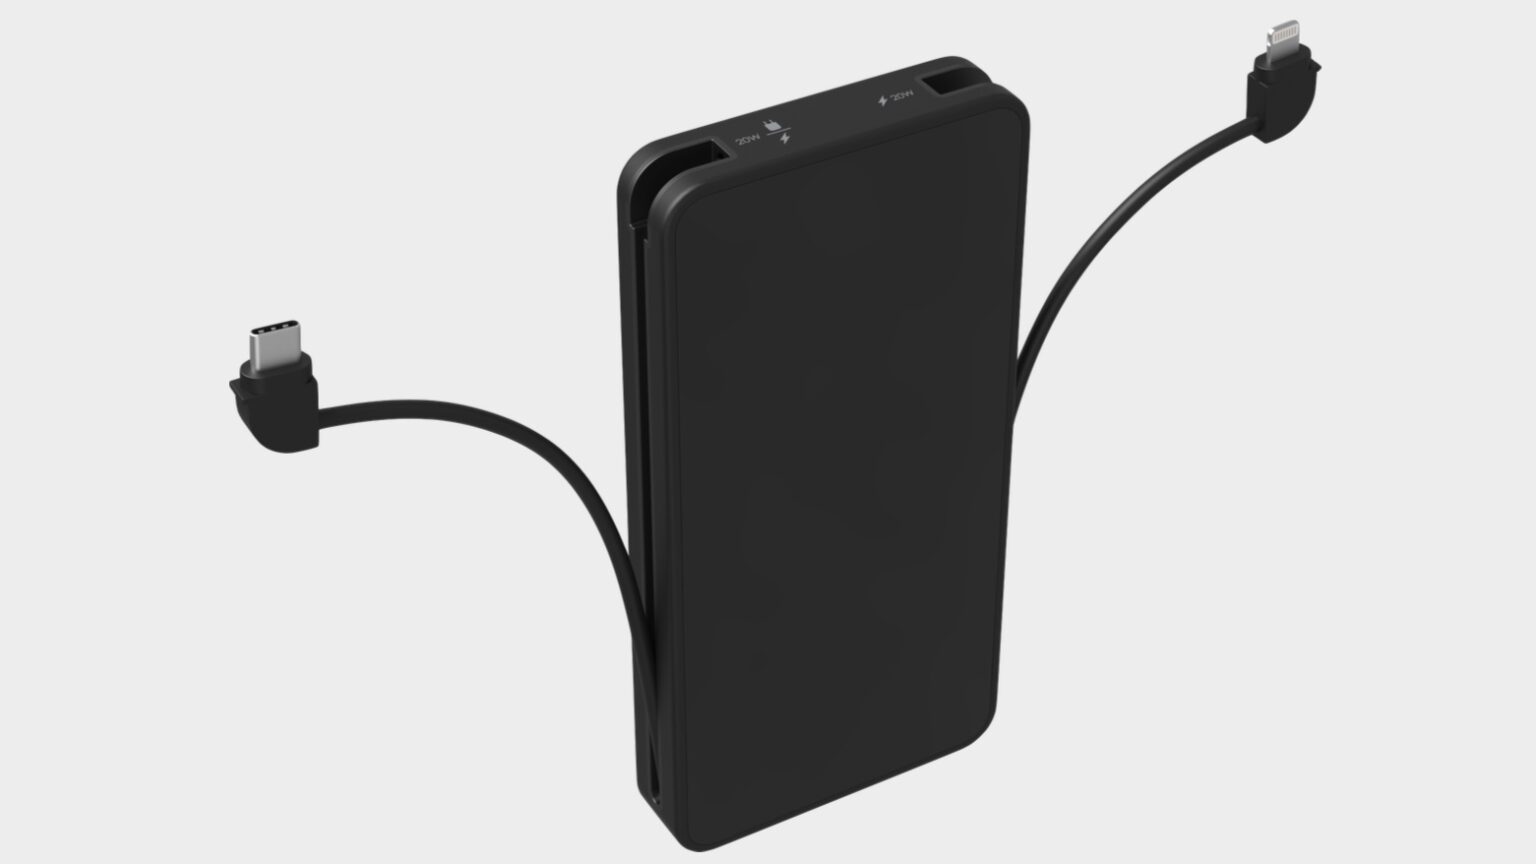 Mophie's new power bank sports built-in iPhone and Mac charging cables